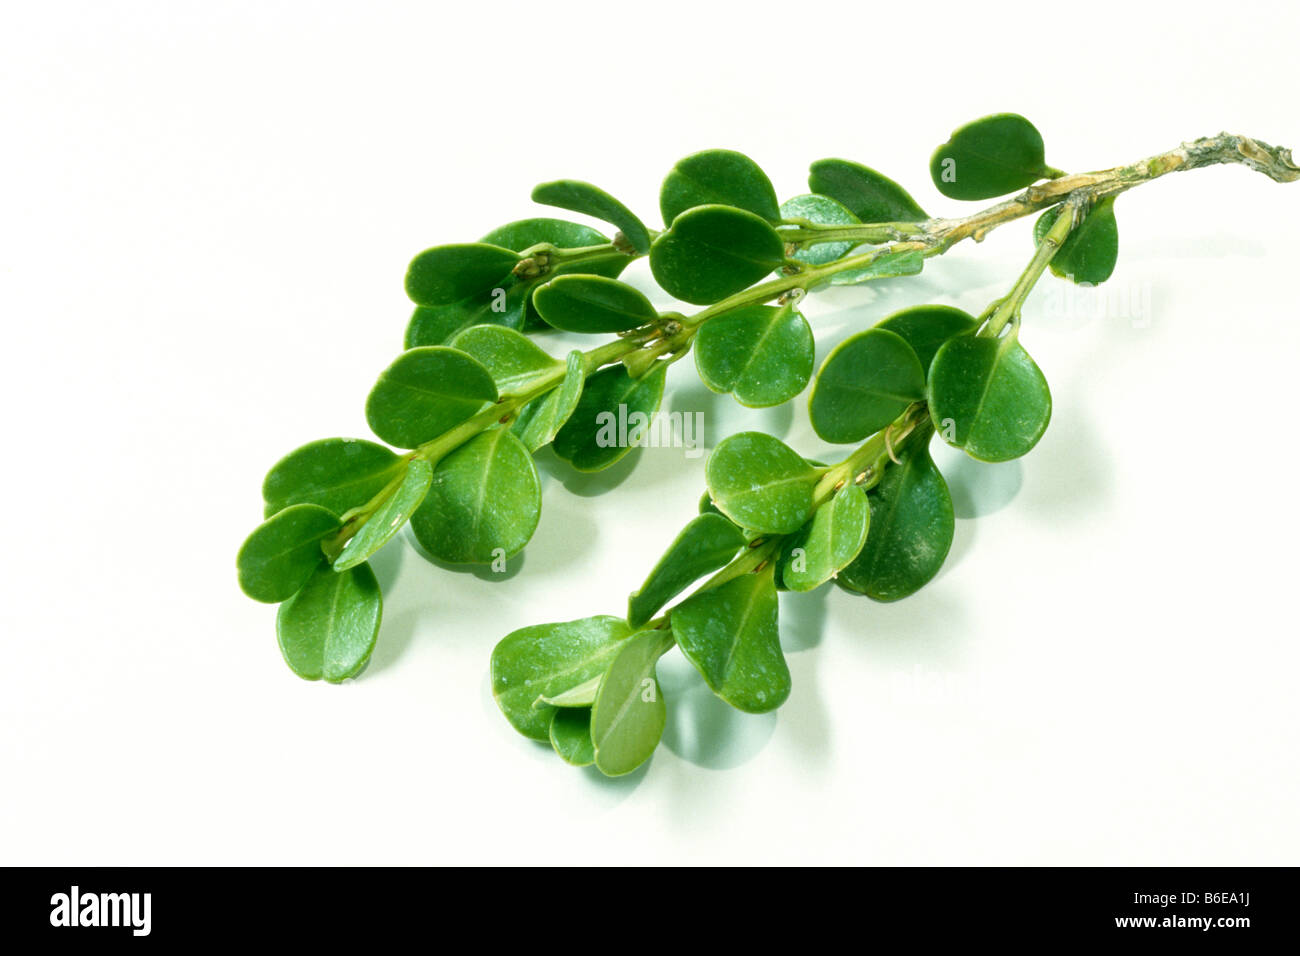 Common Box, Boxwood (Buxus sempervirens), twig with leaves, studio picture Stock Photo